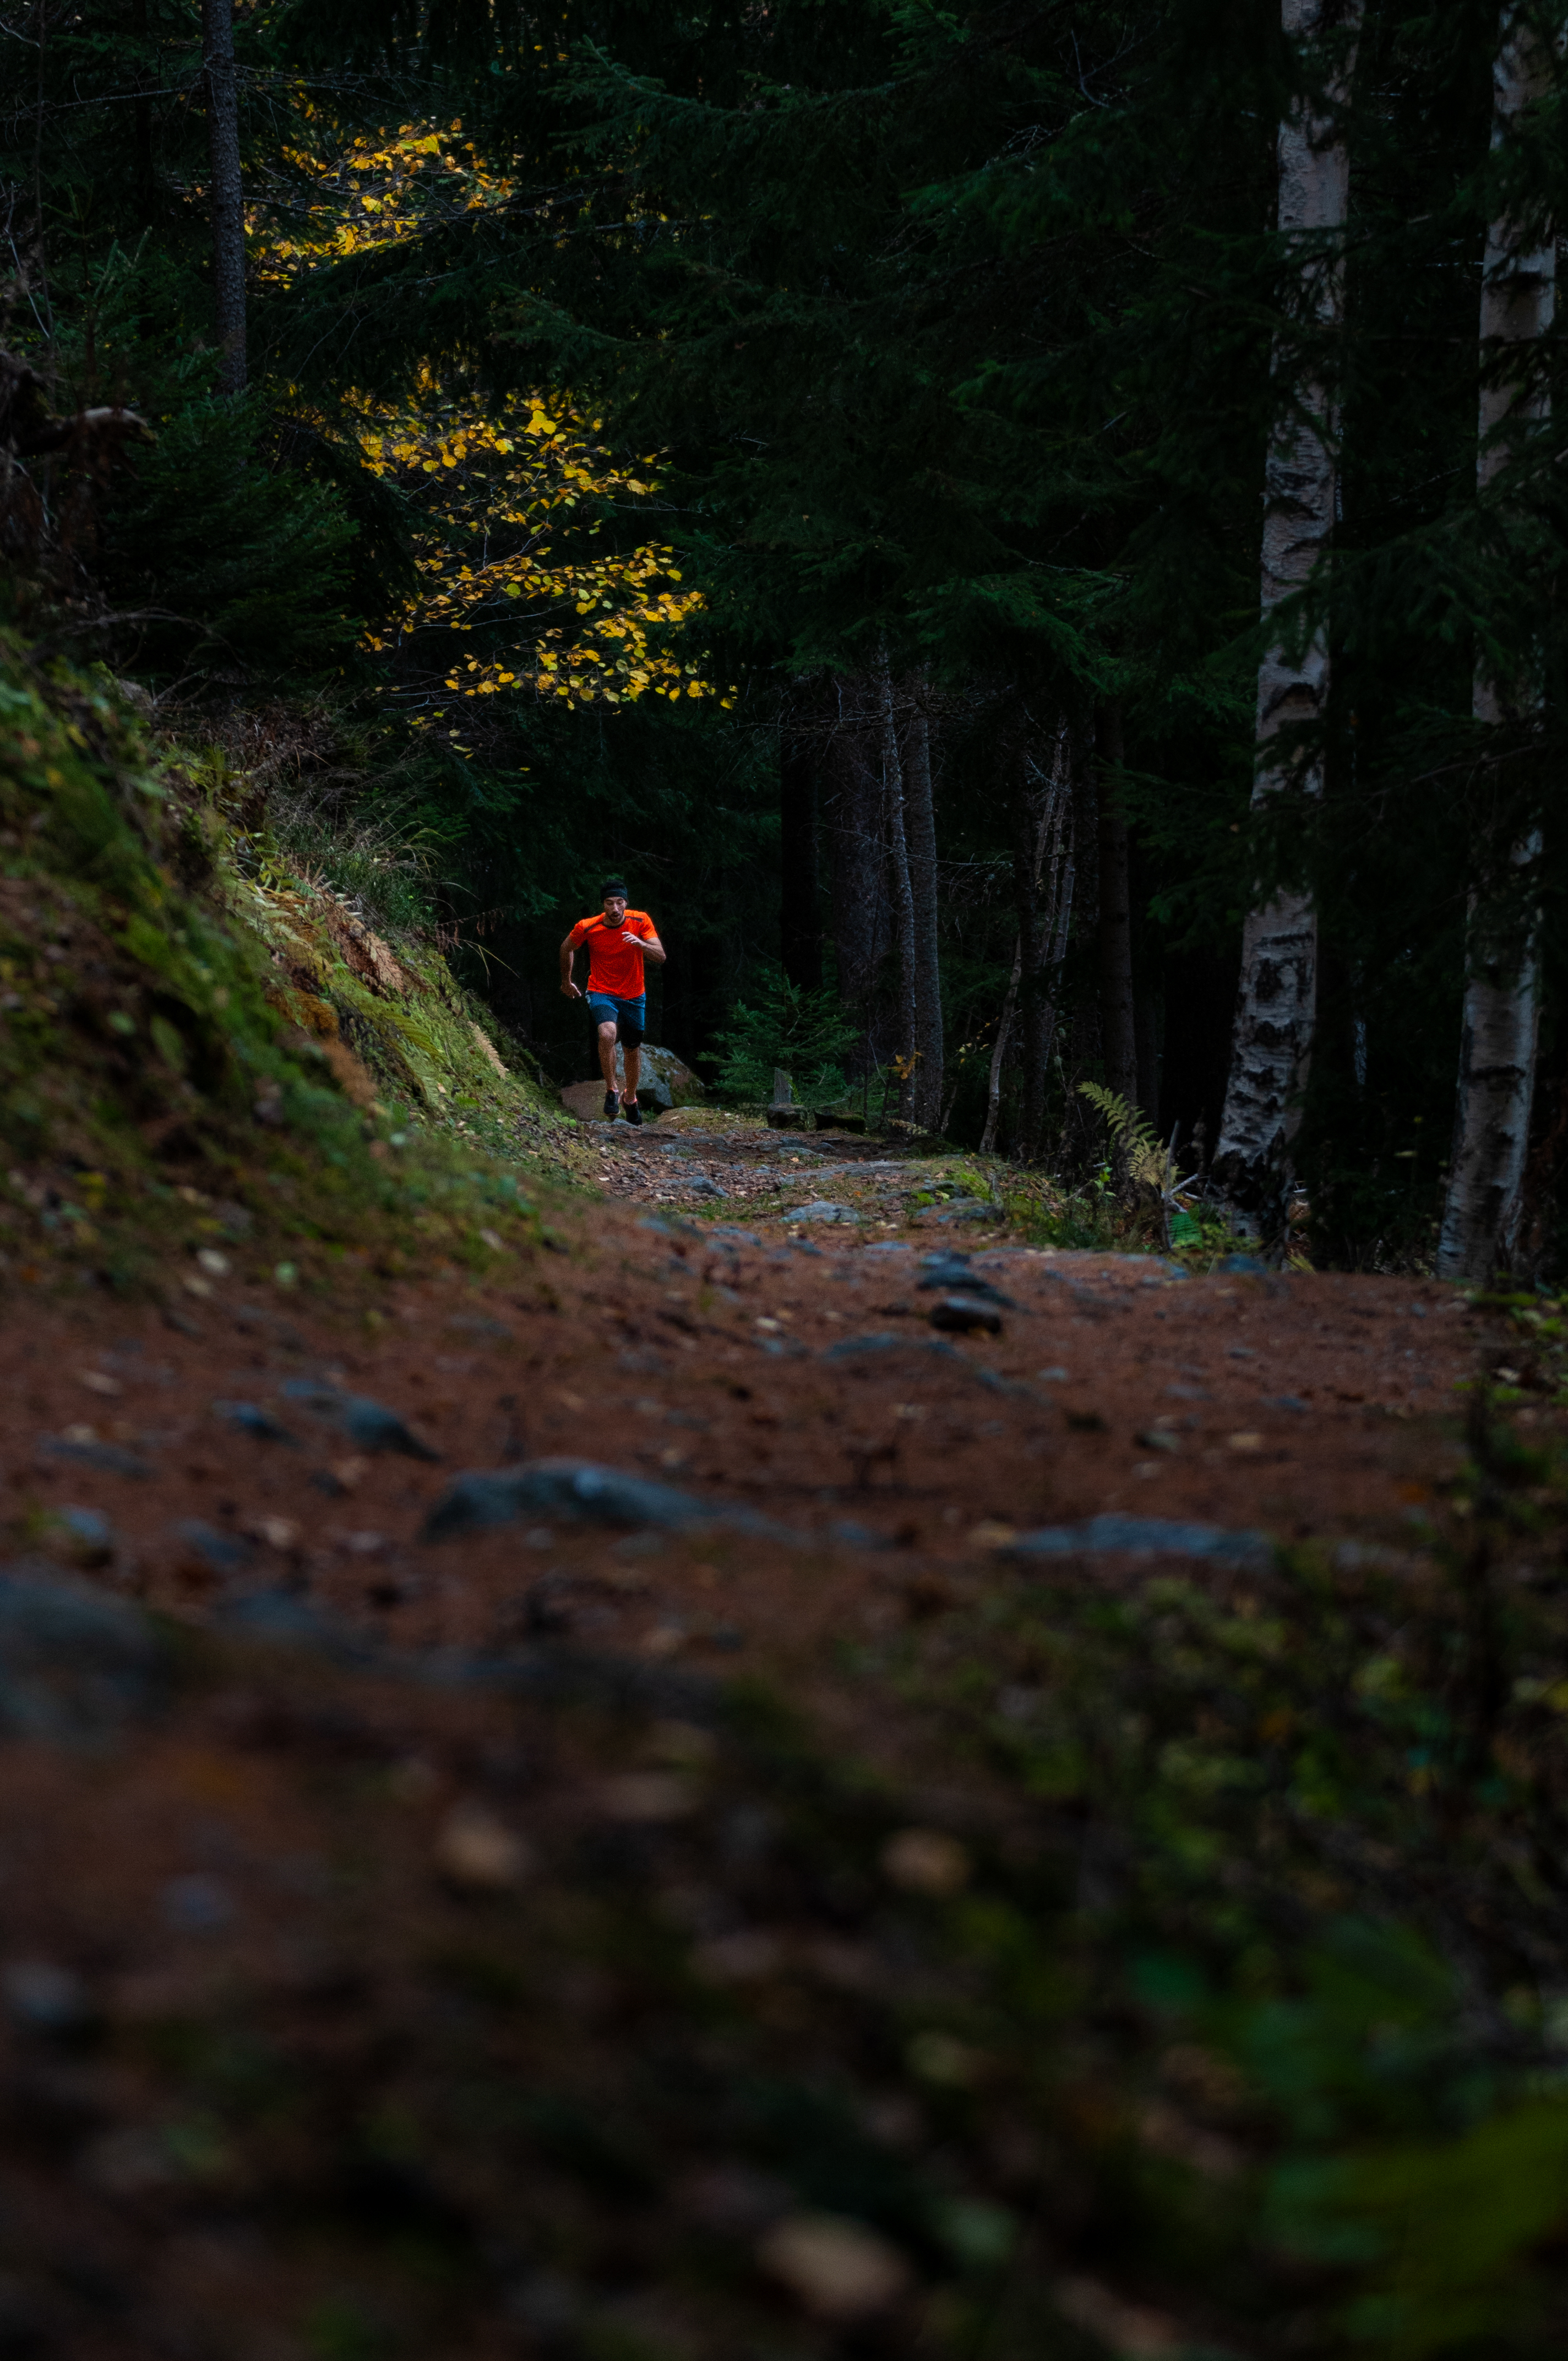 A person trail running in a dark forest